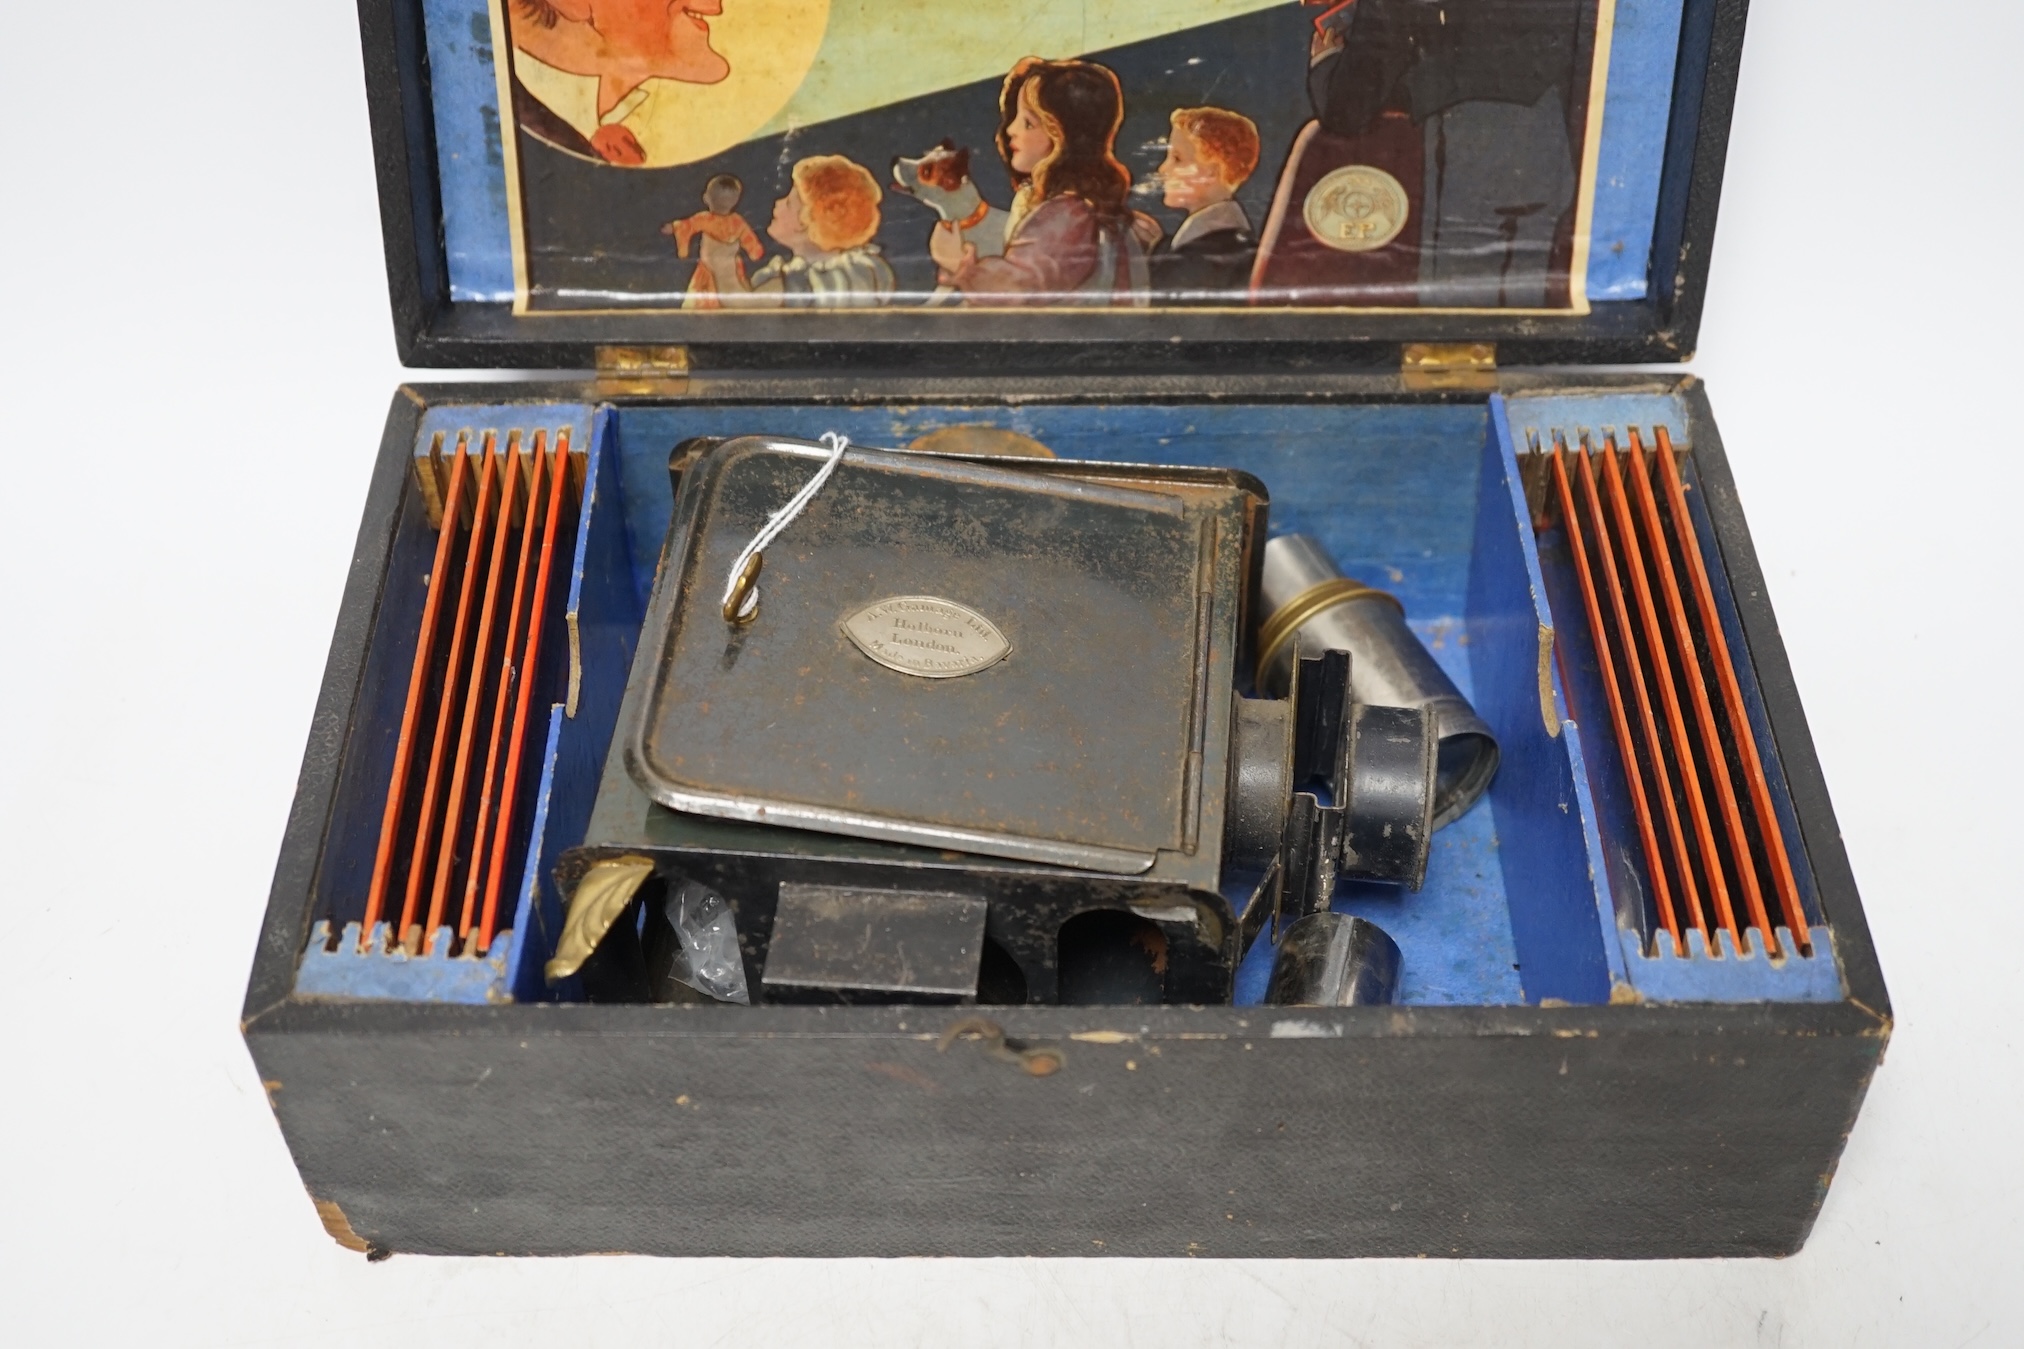 From the Studio of Fred Cuming. Vintage E.P. magic lantern and slides, cased. Condition - fair